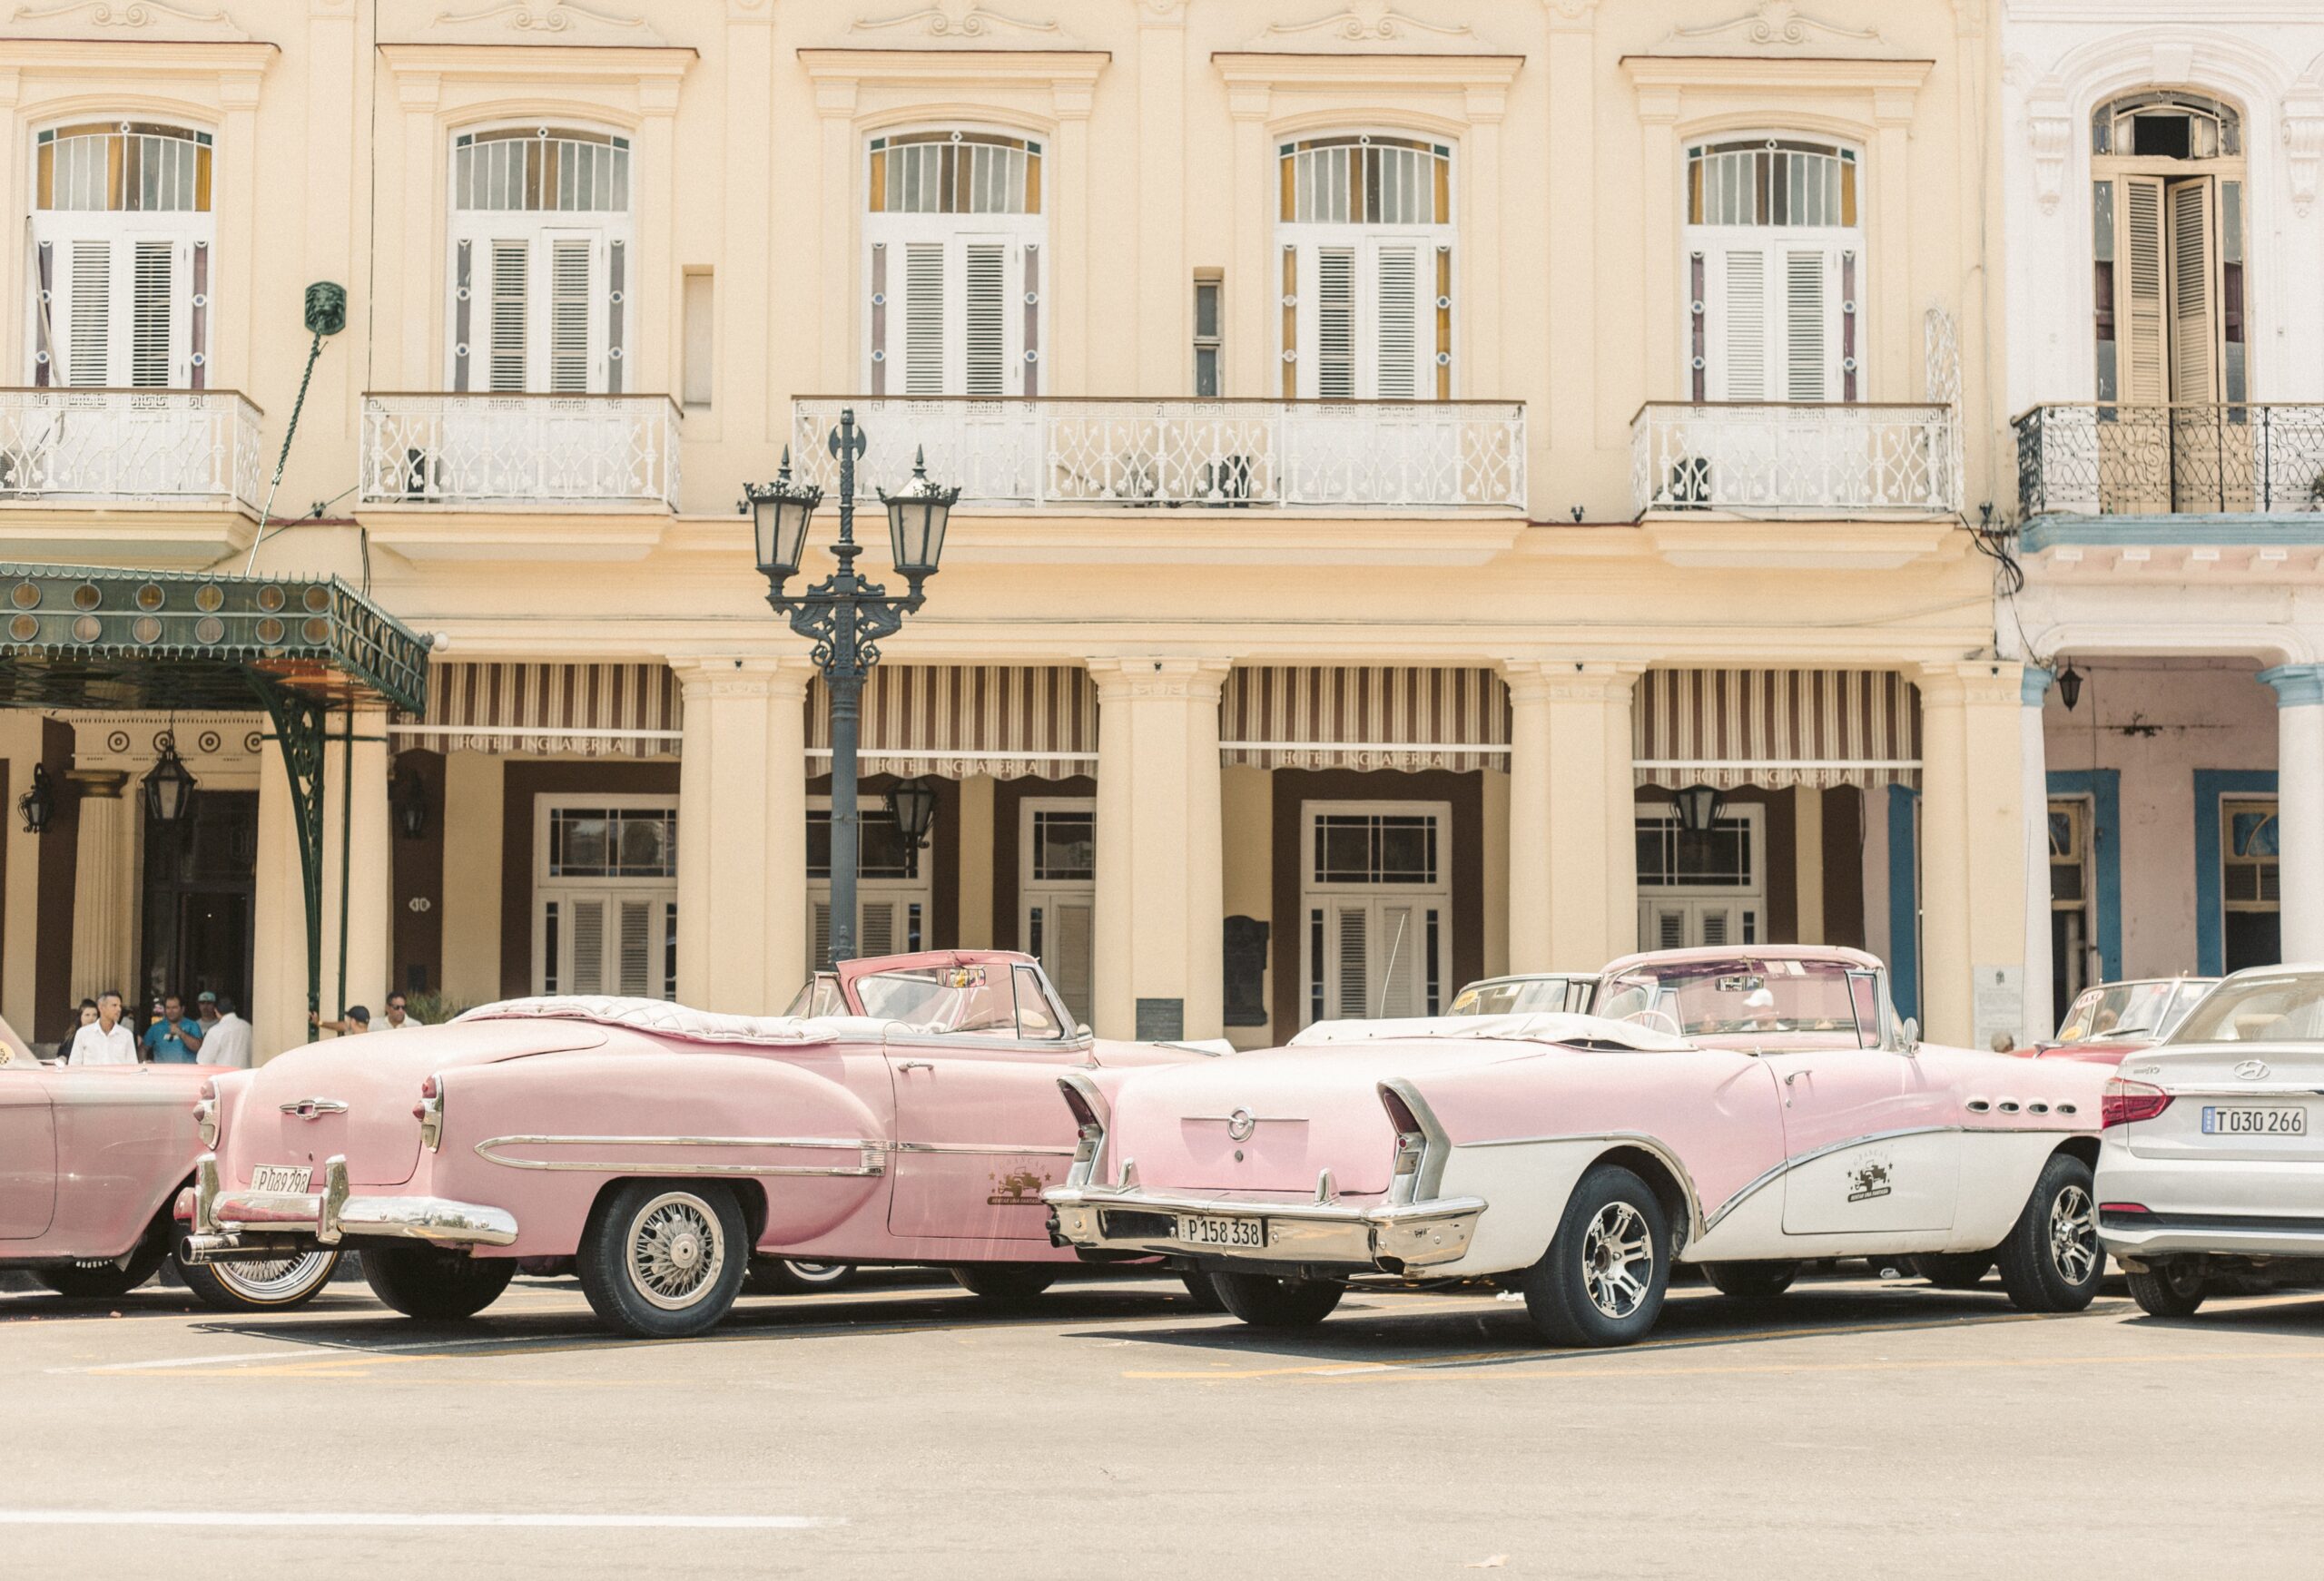 Must Know Before Traveling To Cuba